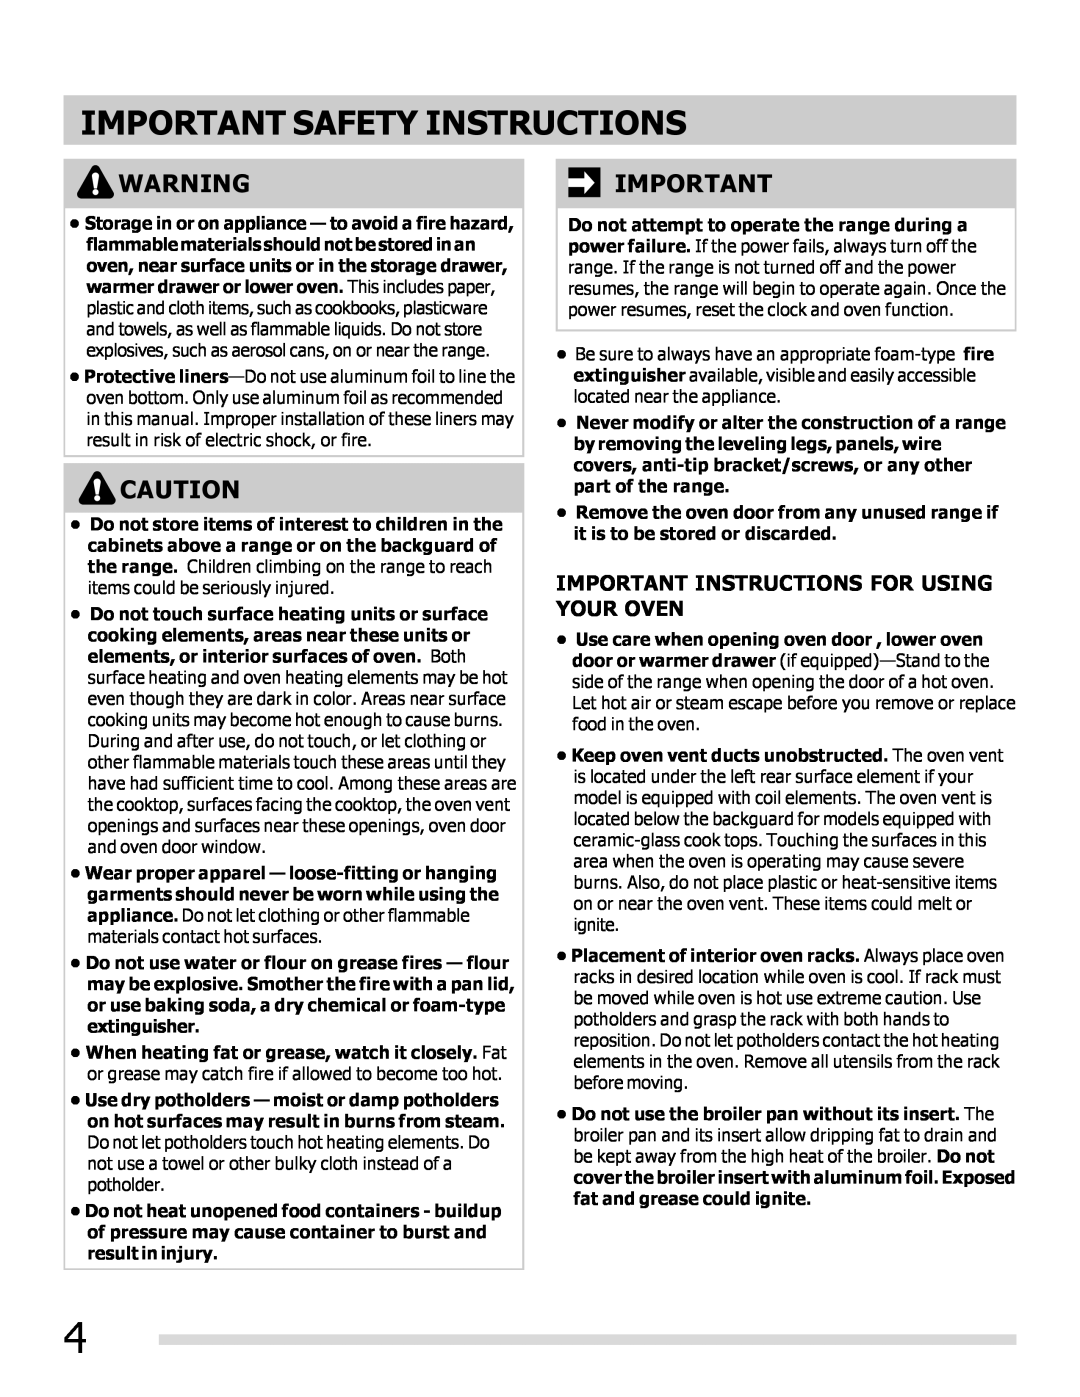 Frigidaire FPEF3081MF Important Instructions For Using Your Oven, Important Safety Instructions 